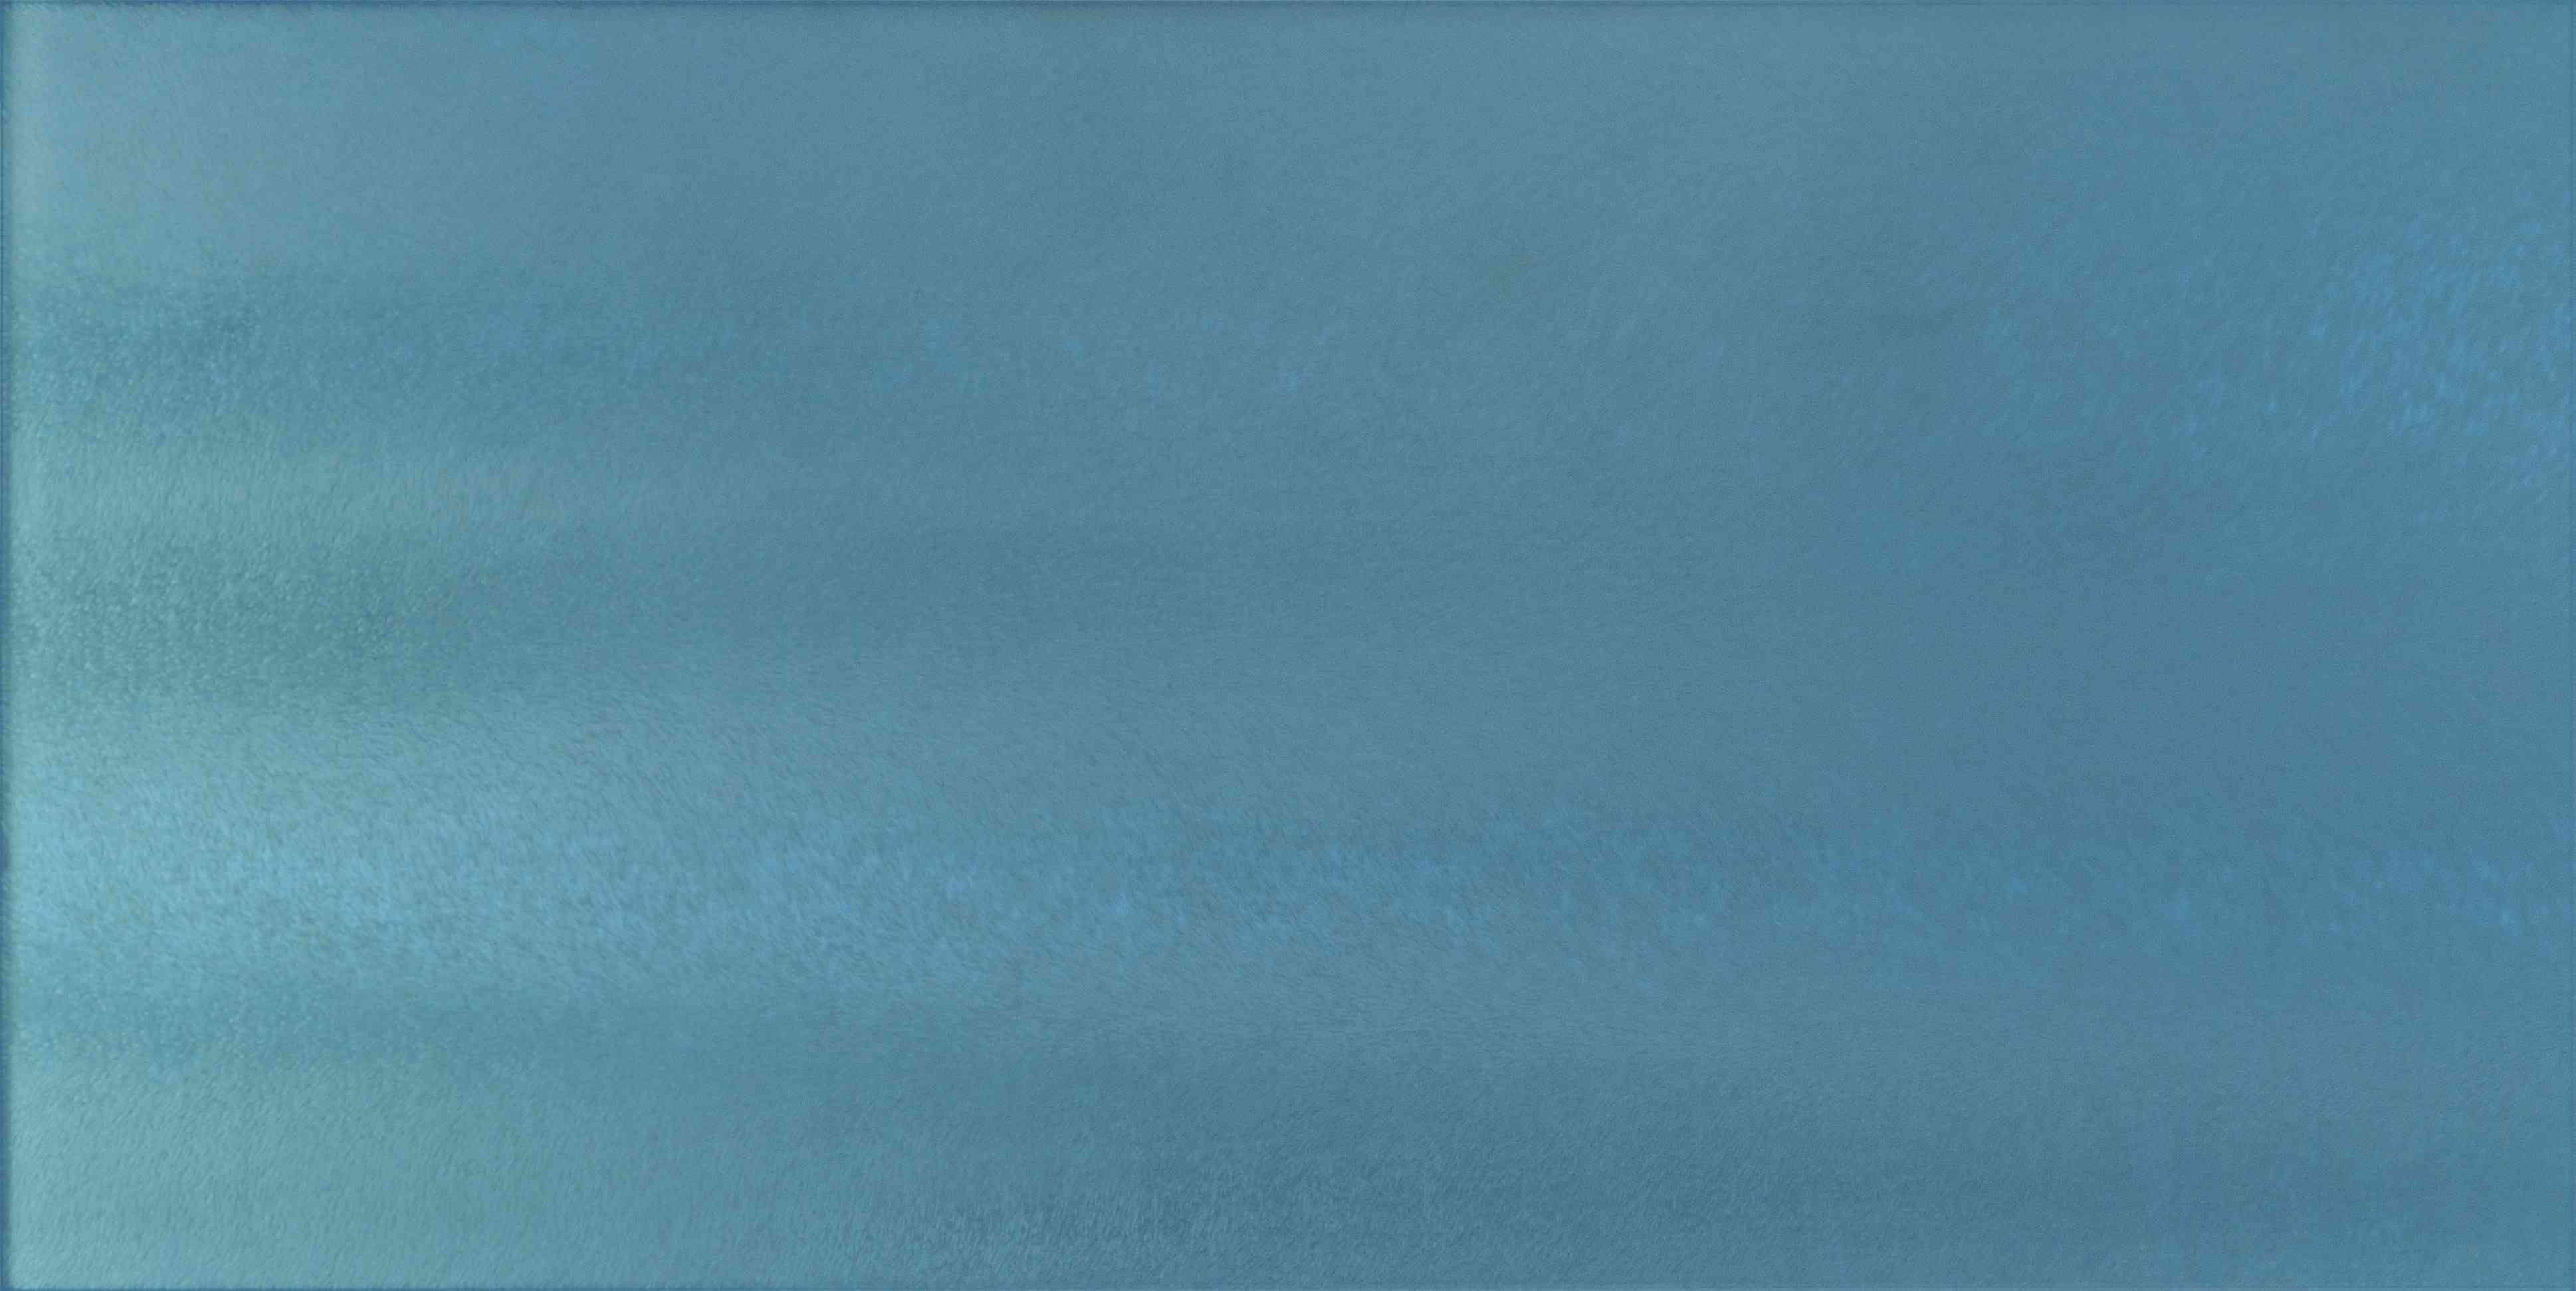 Оriginal Style Glassworks Aurora Borealis Aqua Frosted Decorative Frosted Glass Tile 30x60cm